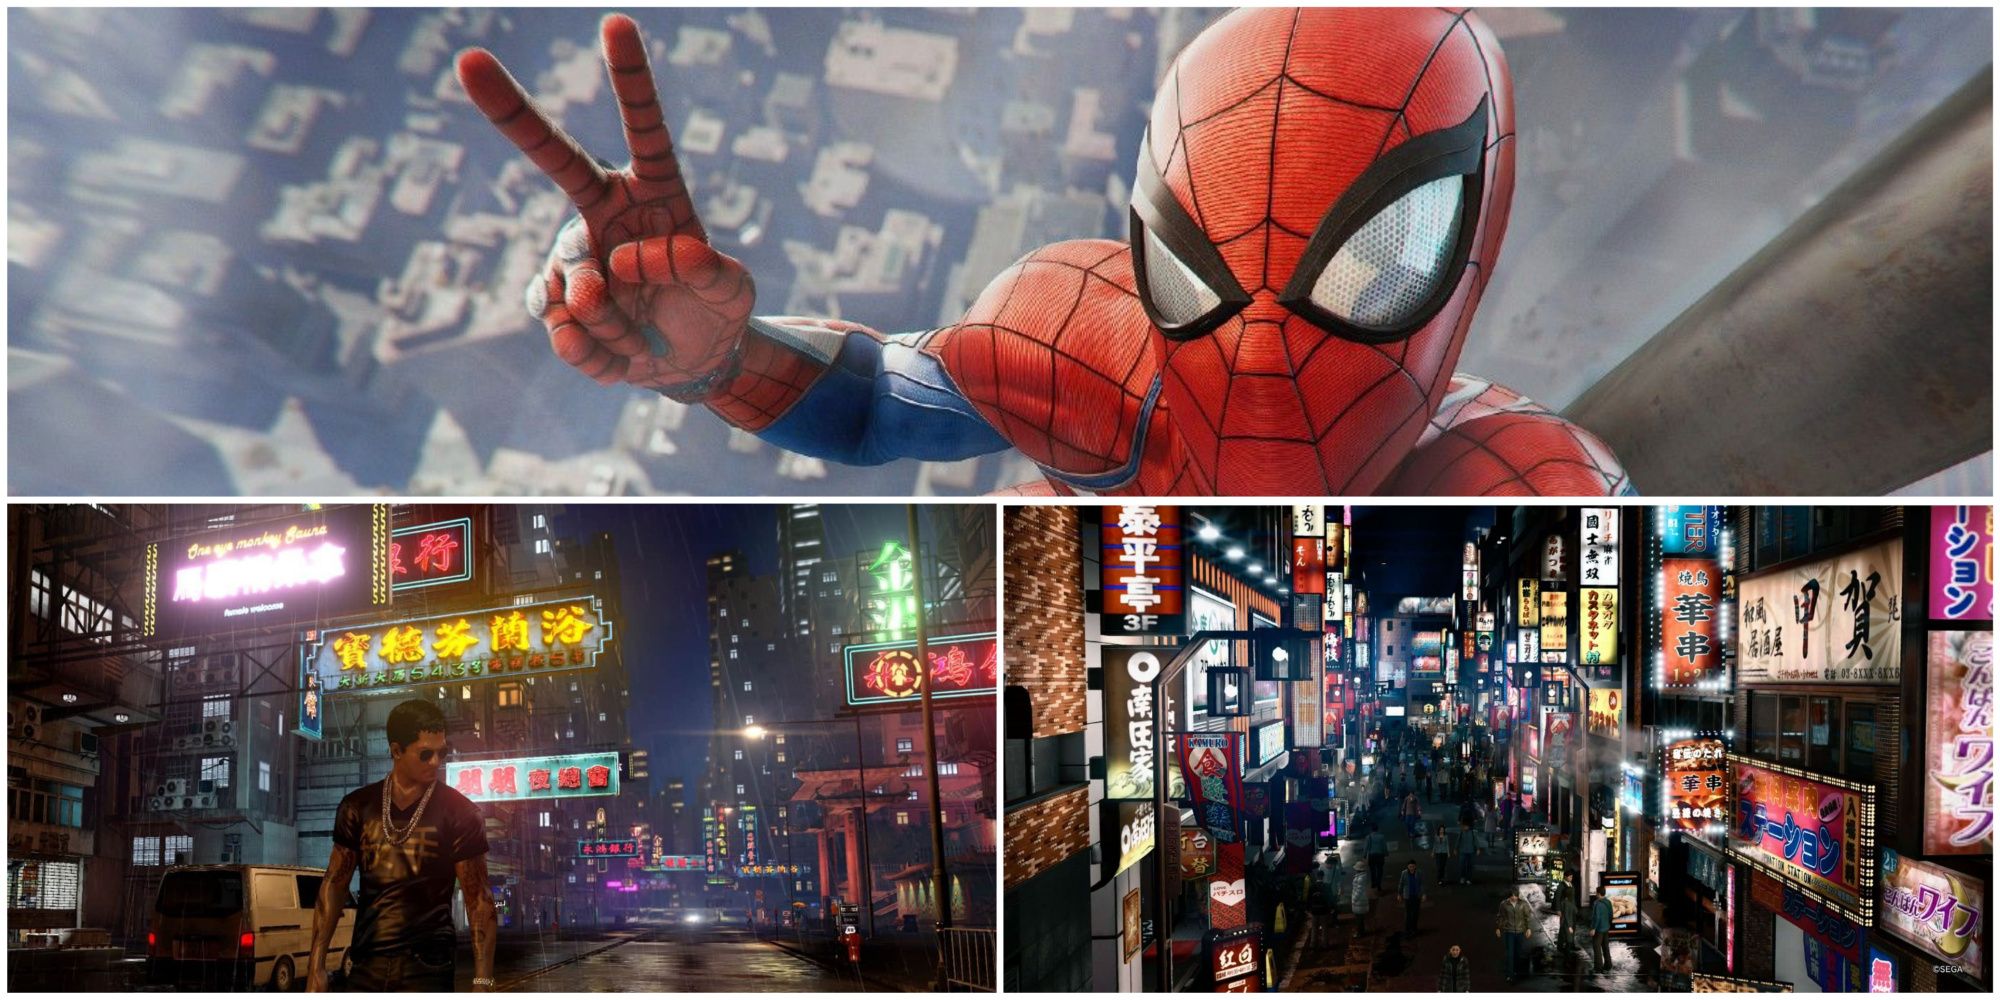 Open-World Virtual Tourism Games- Marvel's Spider-Man Sleeping Dogs Like a Dragon